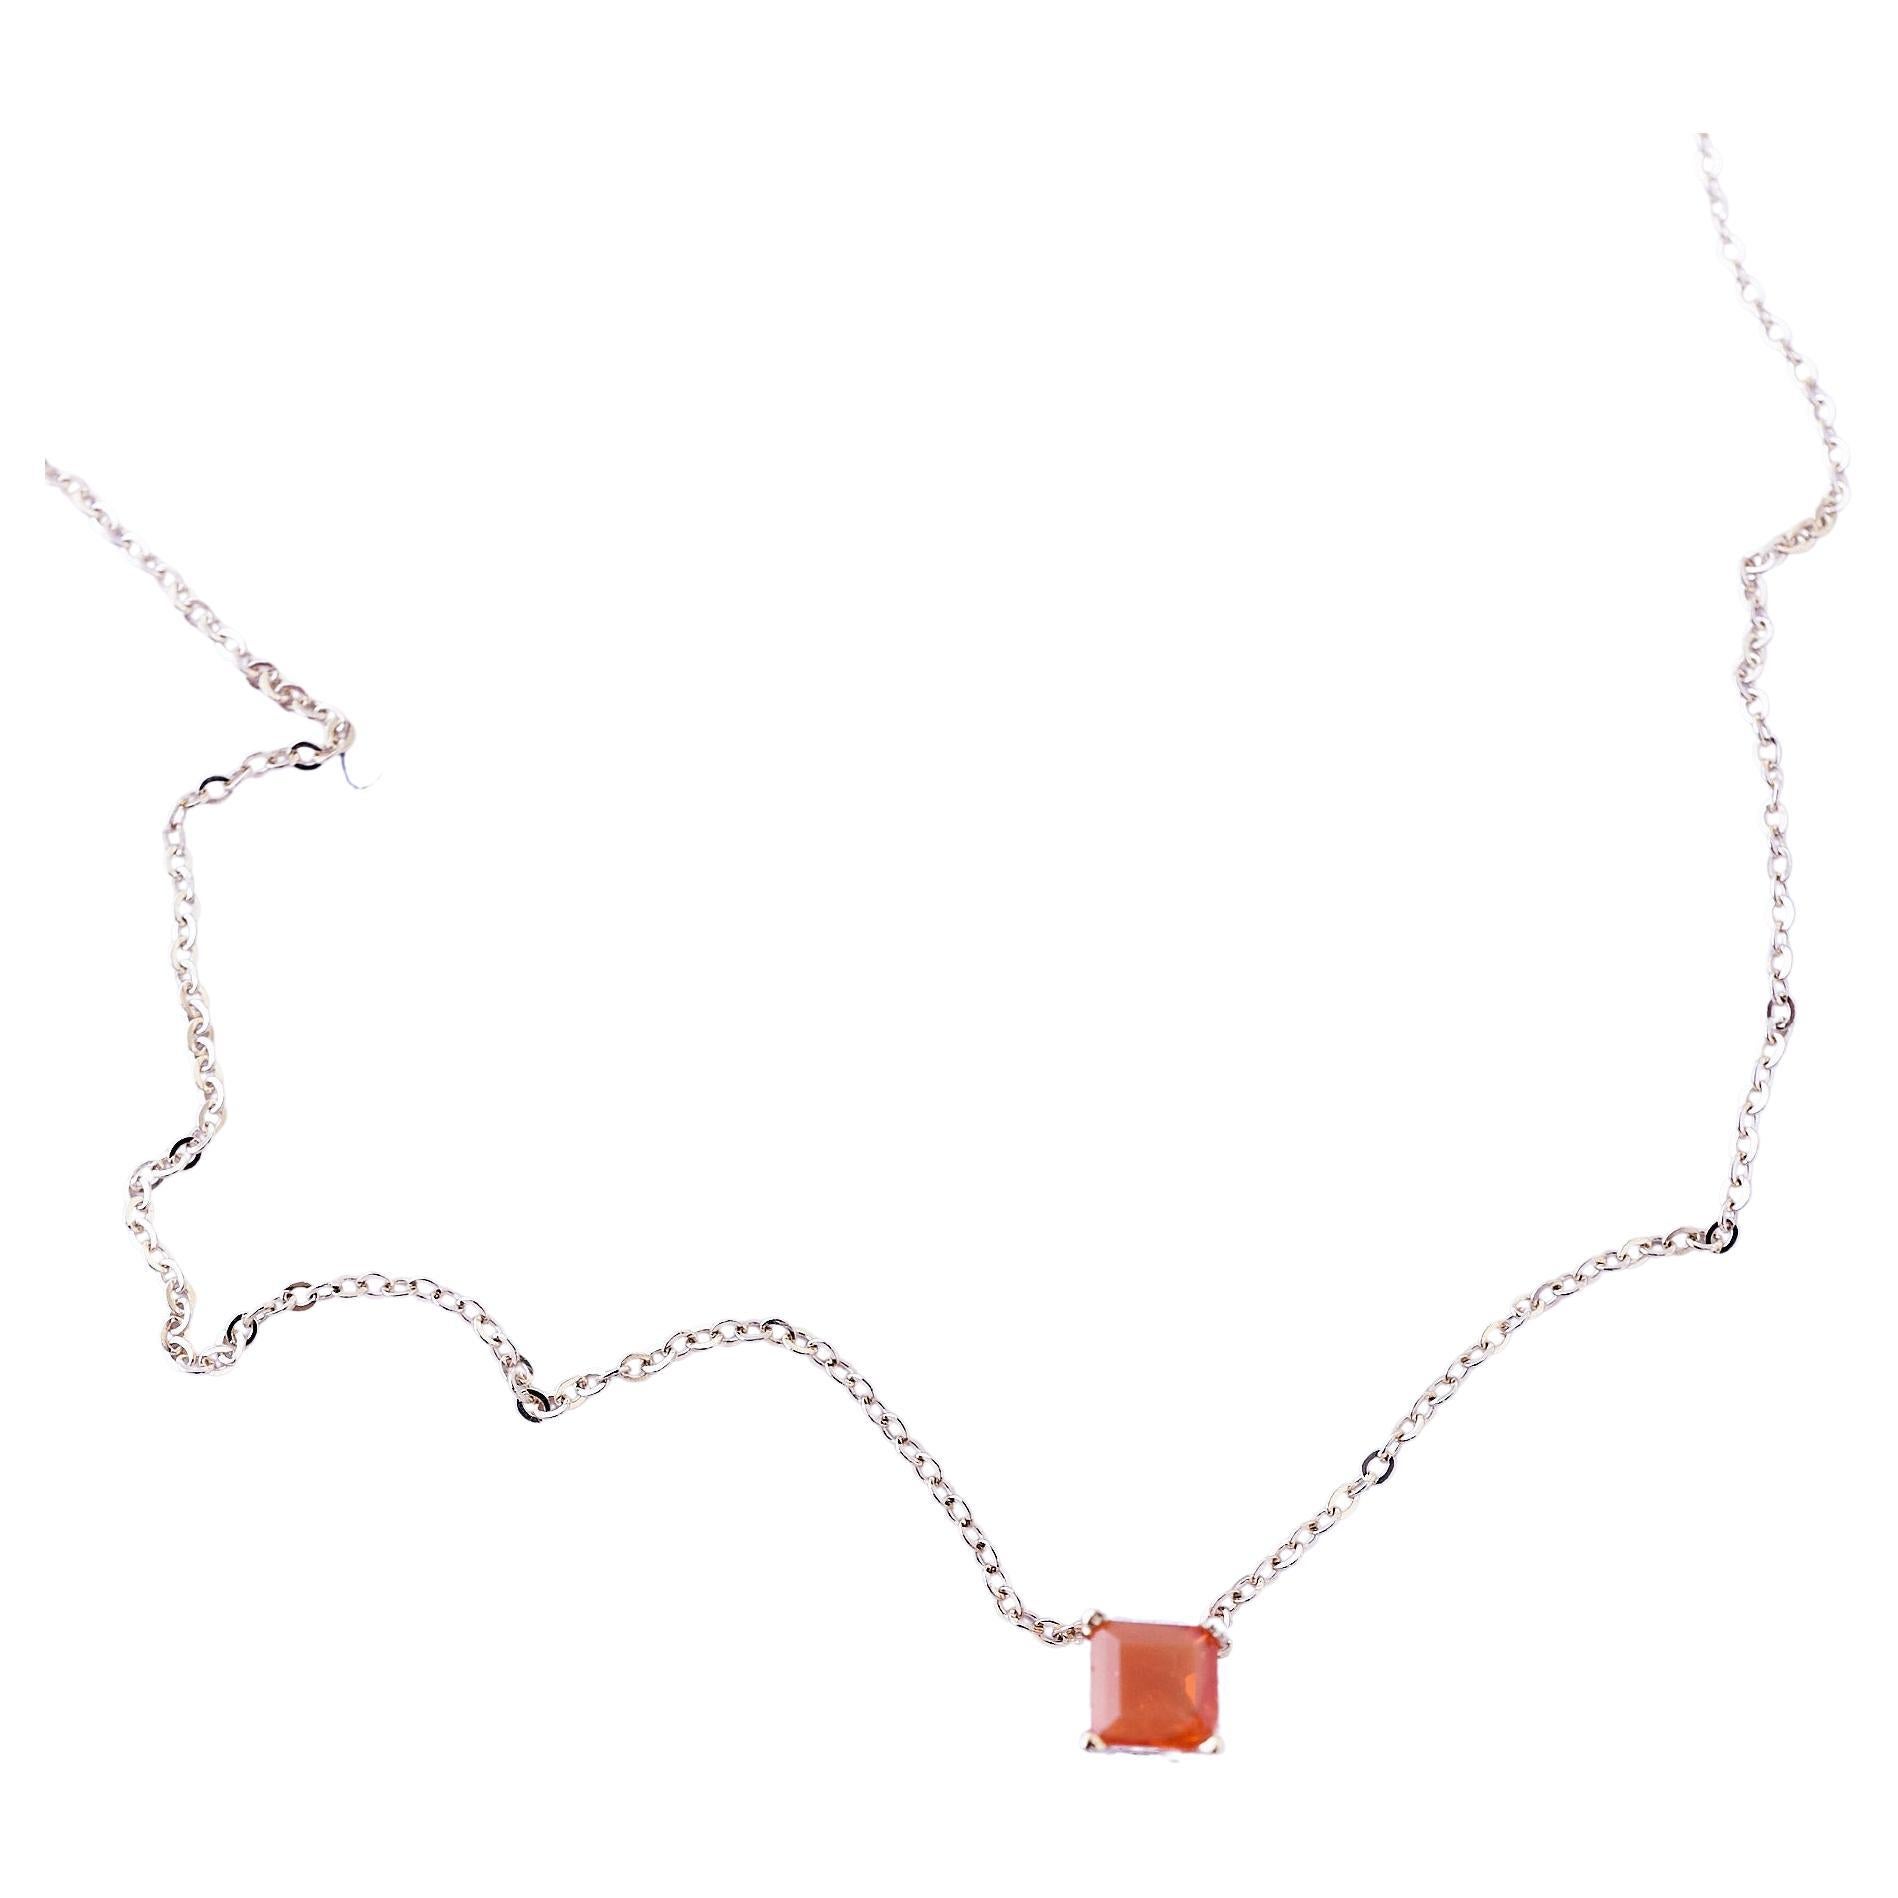 Square Fire Opal Gold Chain Necklace Choker J Dauphin